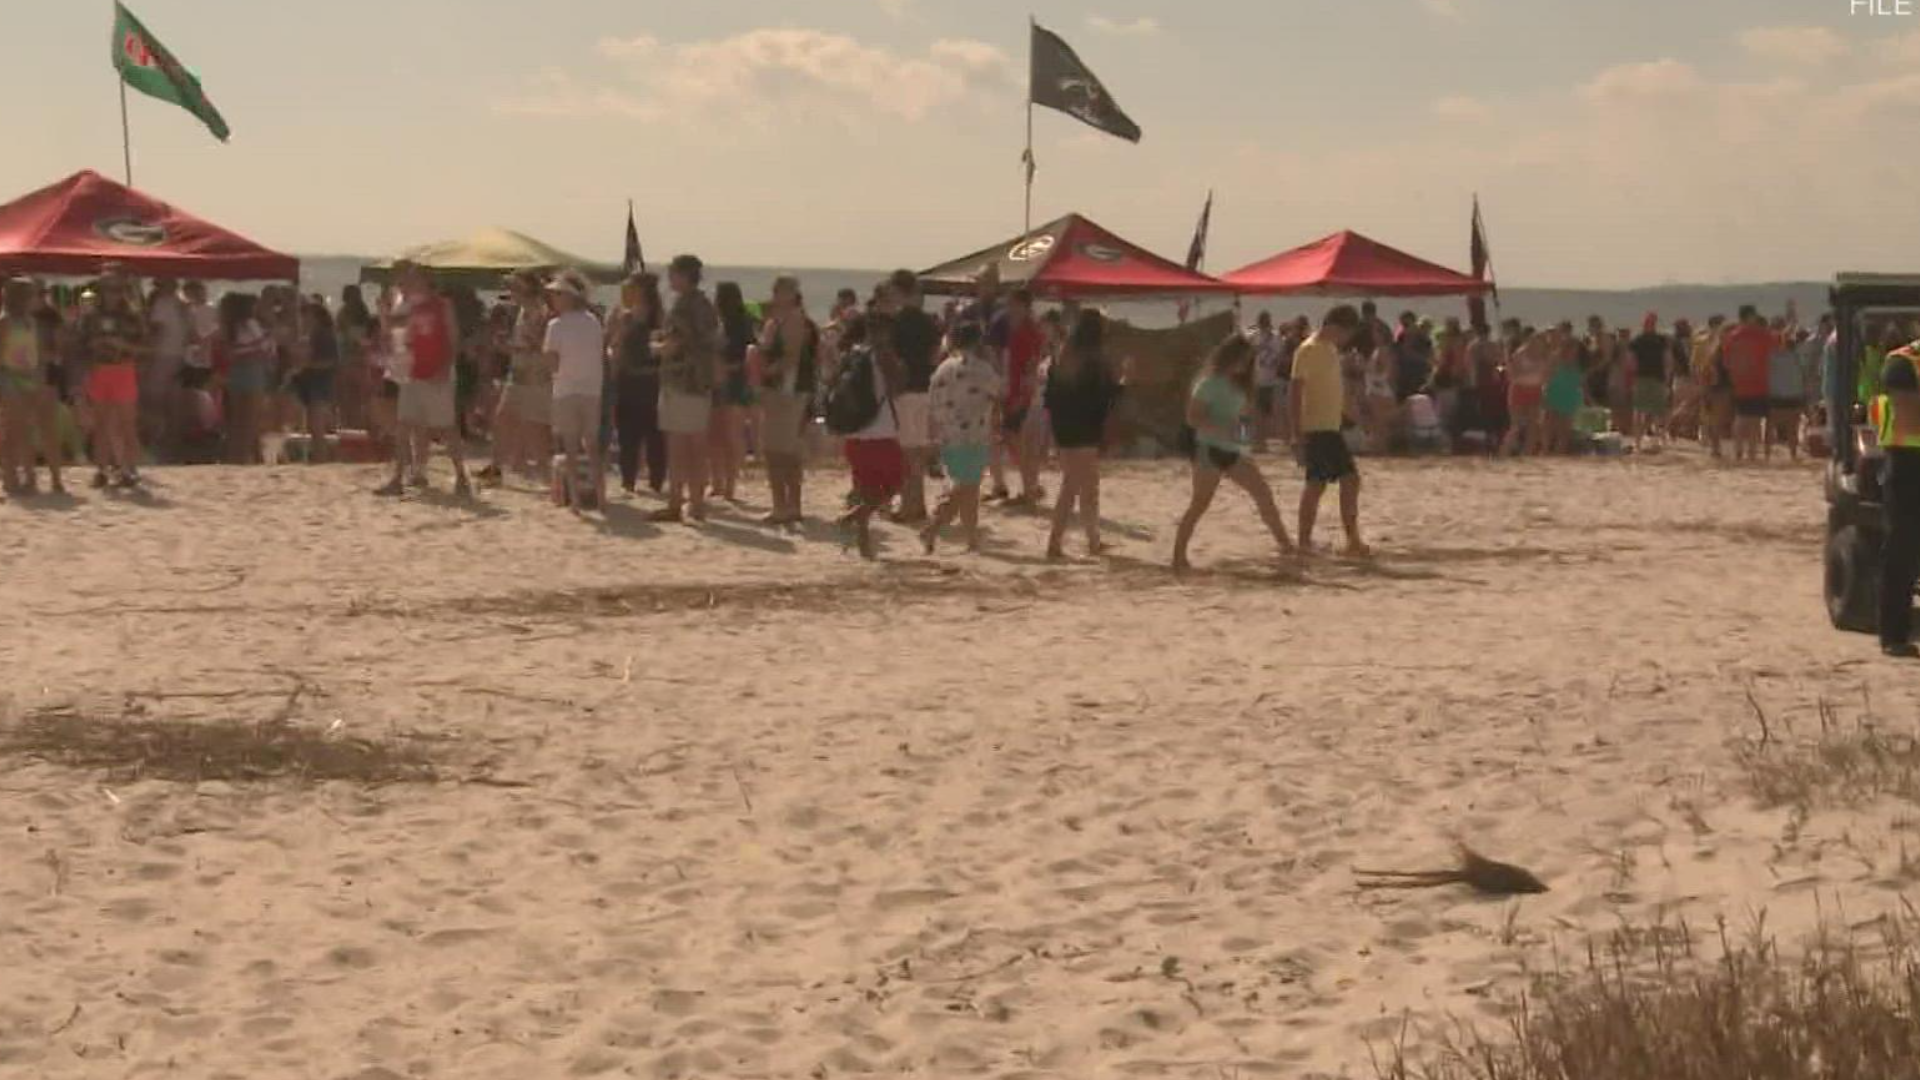 Alcohol banned for student parties on St. Simons Island beaches